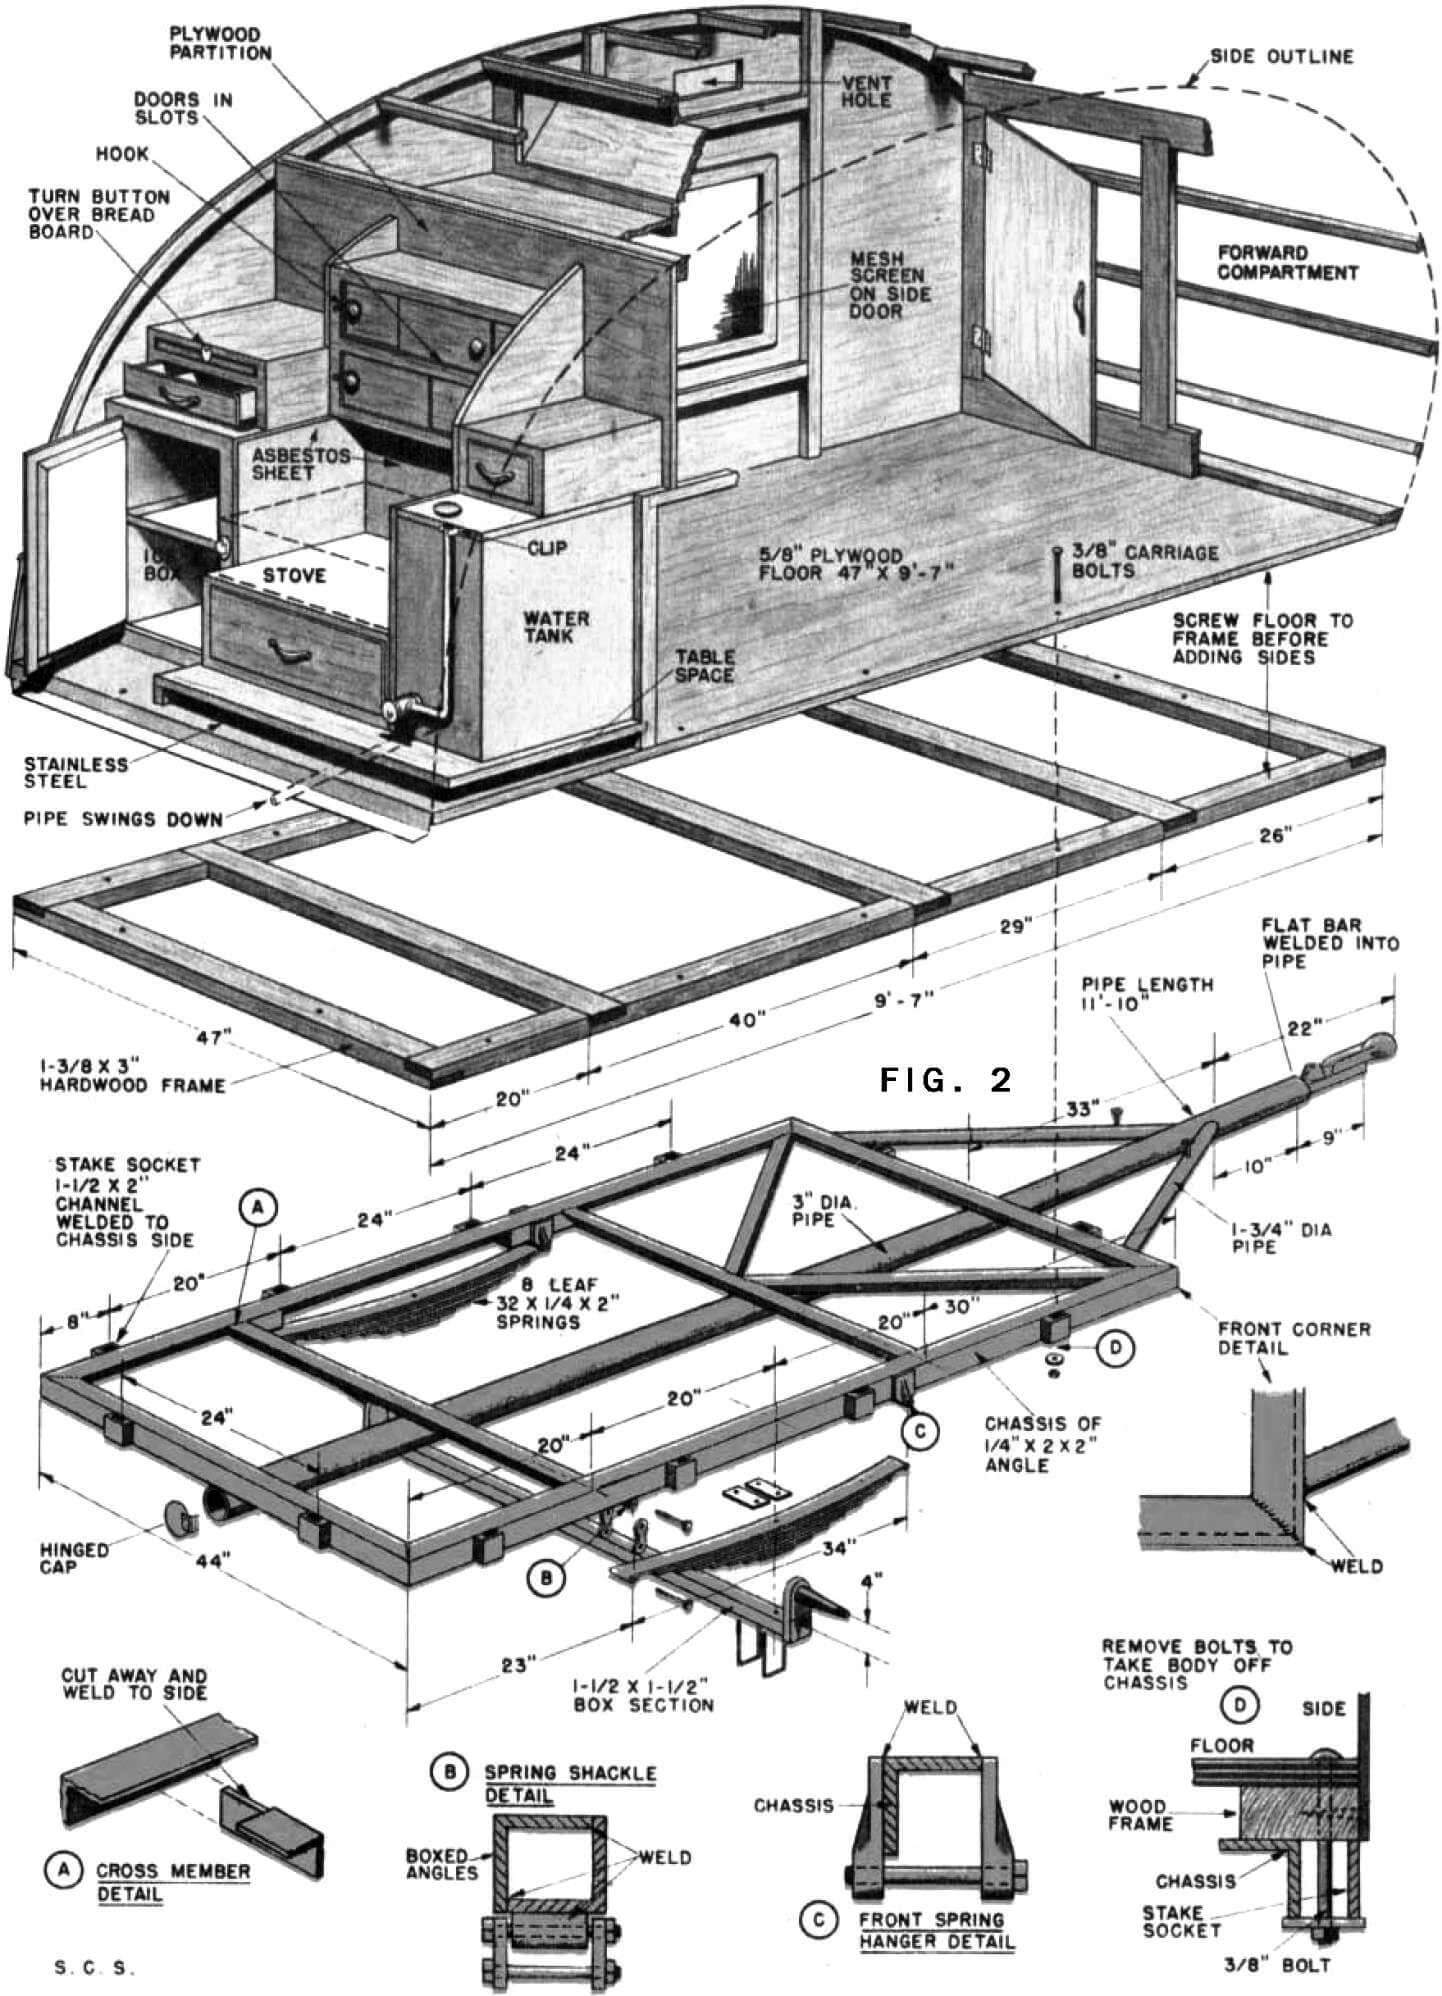 Rice. 2. Frame and layout of the motorhome